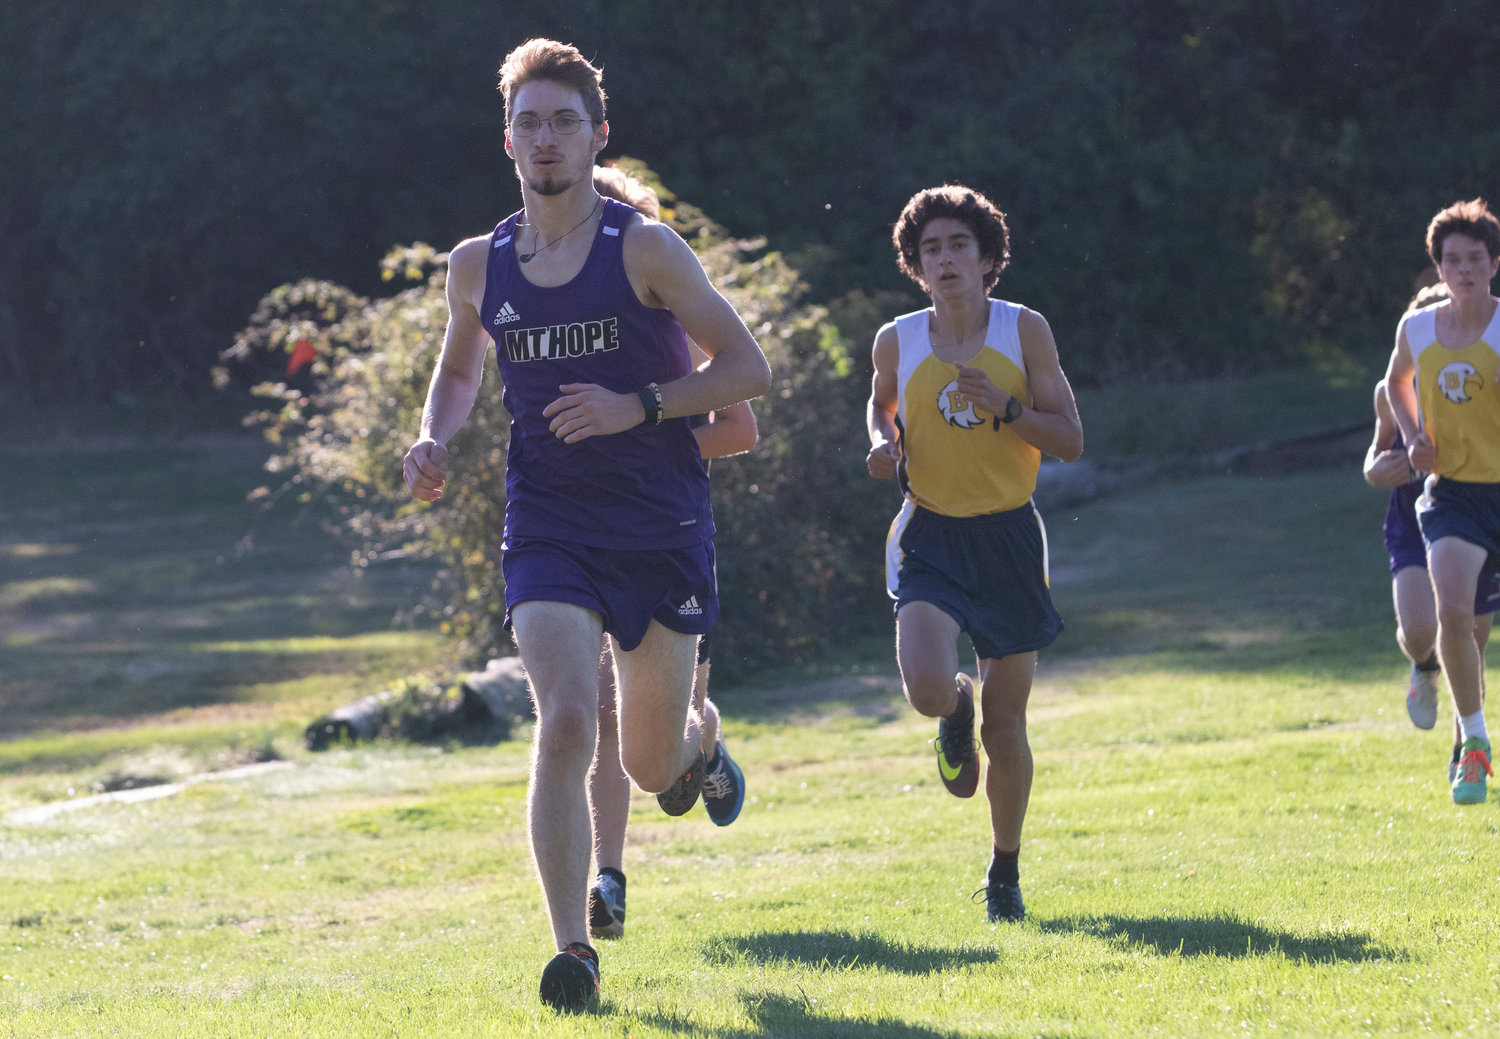 Junior Declan Reed (left) placed 16th with a time of 18:38.